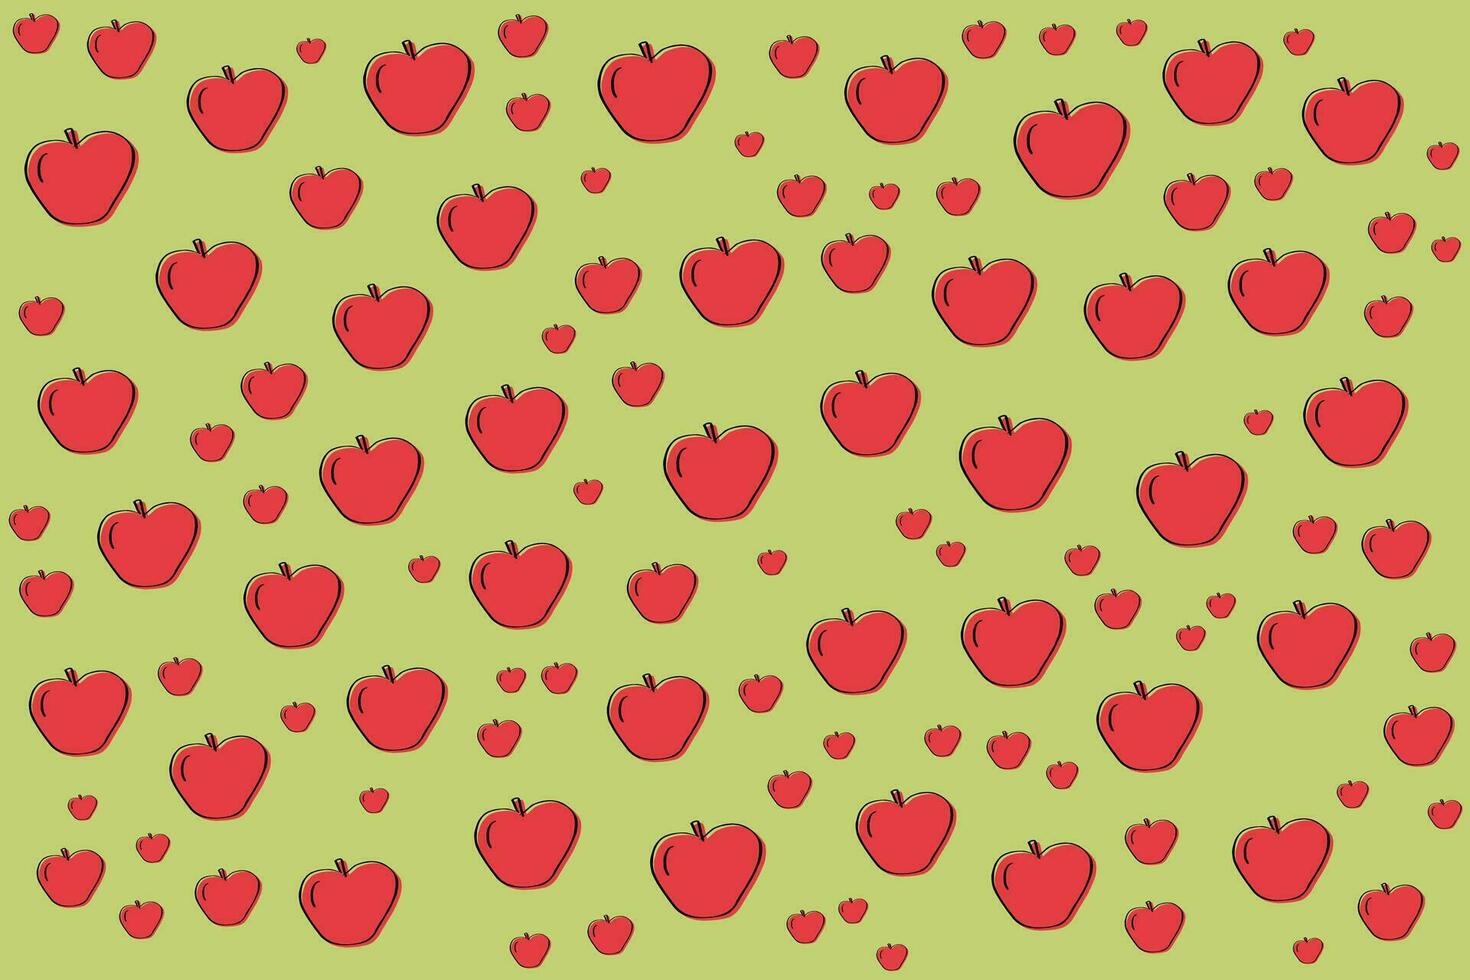 pattern with fruit vector